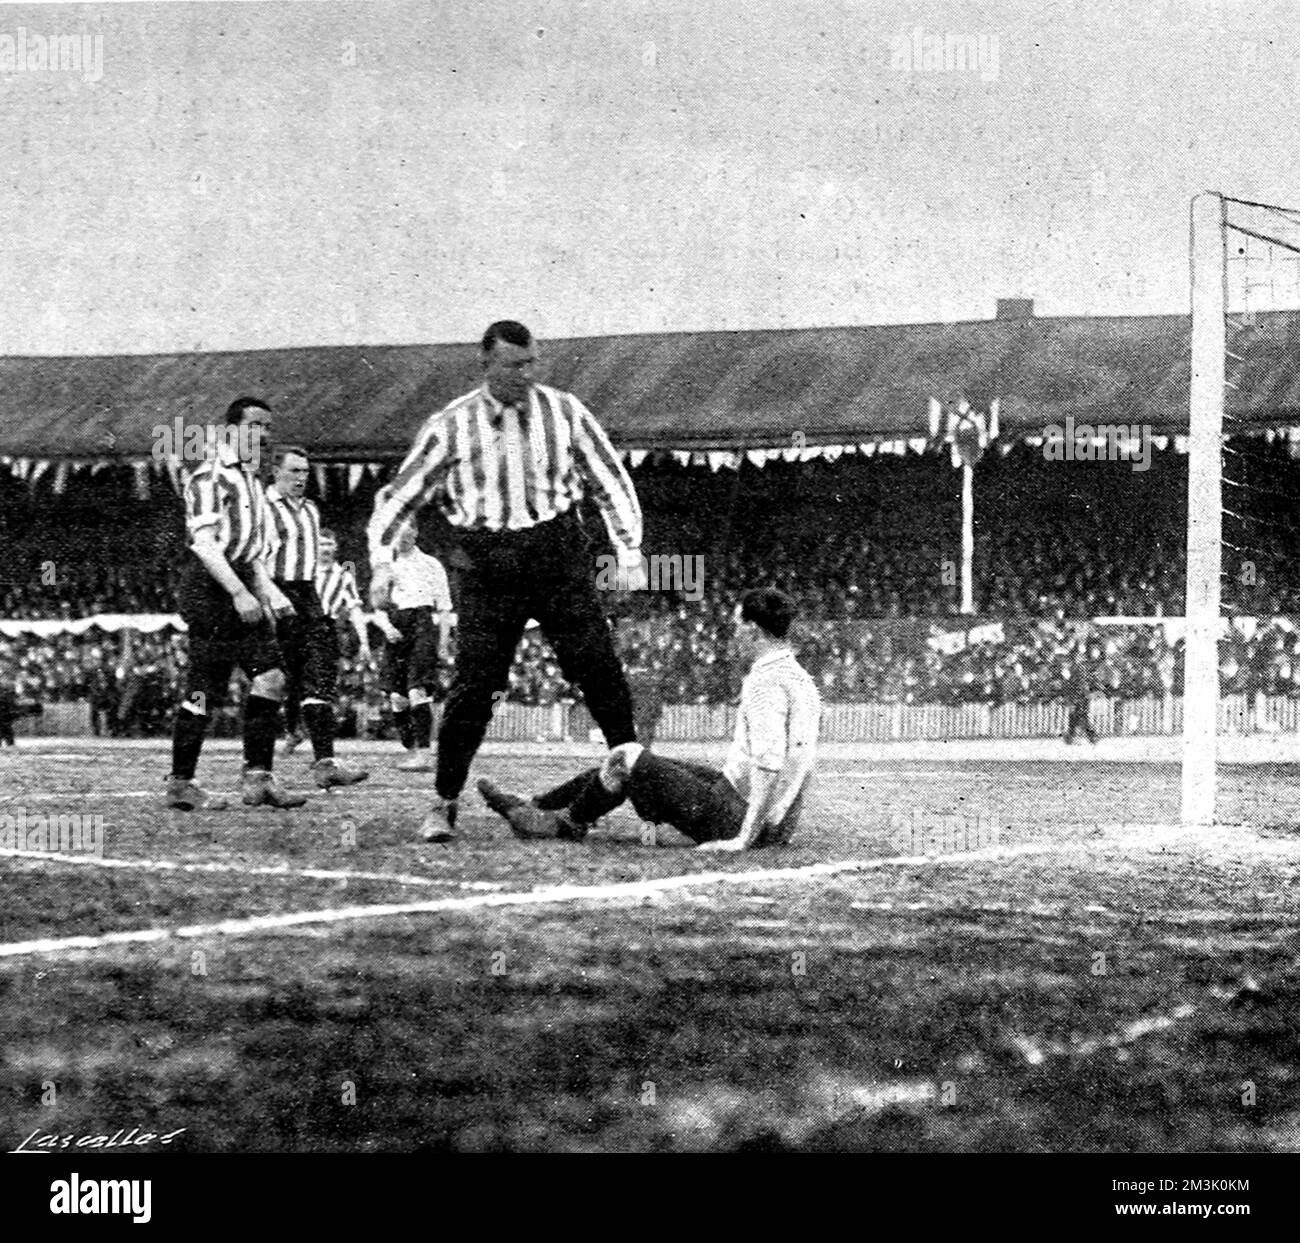 Photograph of the 1901 F.A. Cup Final between Tottenham Hotspur and Sheffield United held at Bolton.  The Cup was won by Tottenham, the first non-league team to win the Cup since the league was instigated, in a replay by 3 goals to 1.    The photograph shows the Sheffield United goalkeeper, William 'Fatty' Foulke, standing over a Tottenham striker after a collision between the two of them.  One of the largest men ever to play professional football, Foulke weighed 22 stone when he retired from football.     Date: 1901 Stock Photo